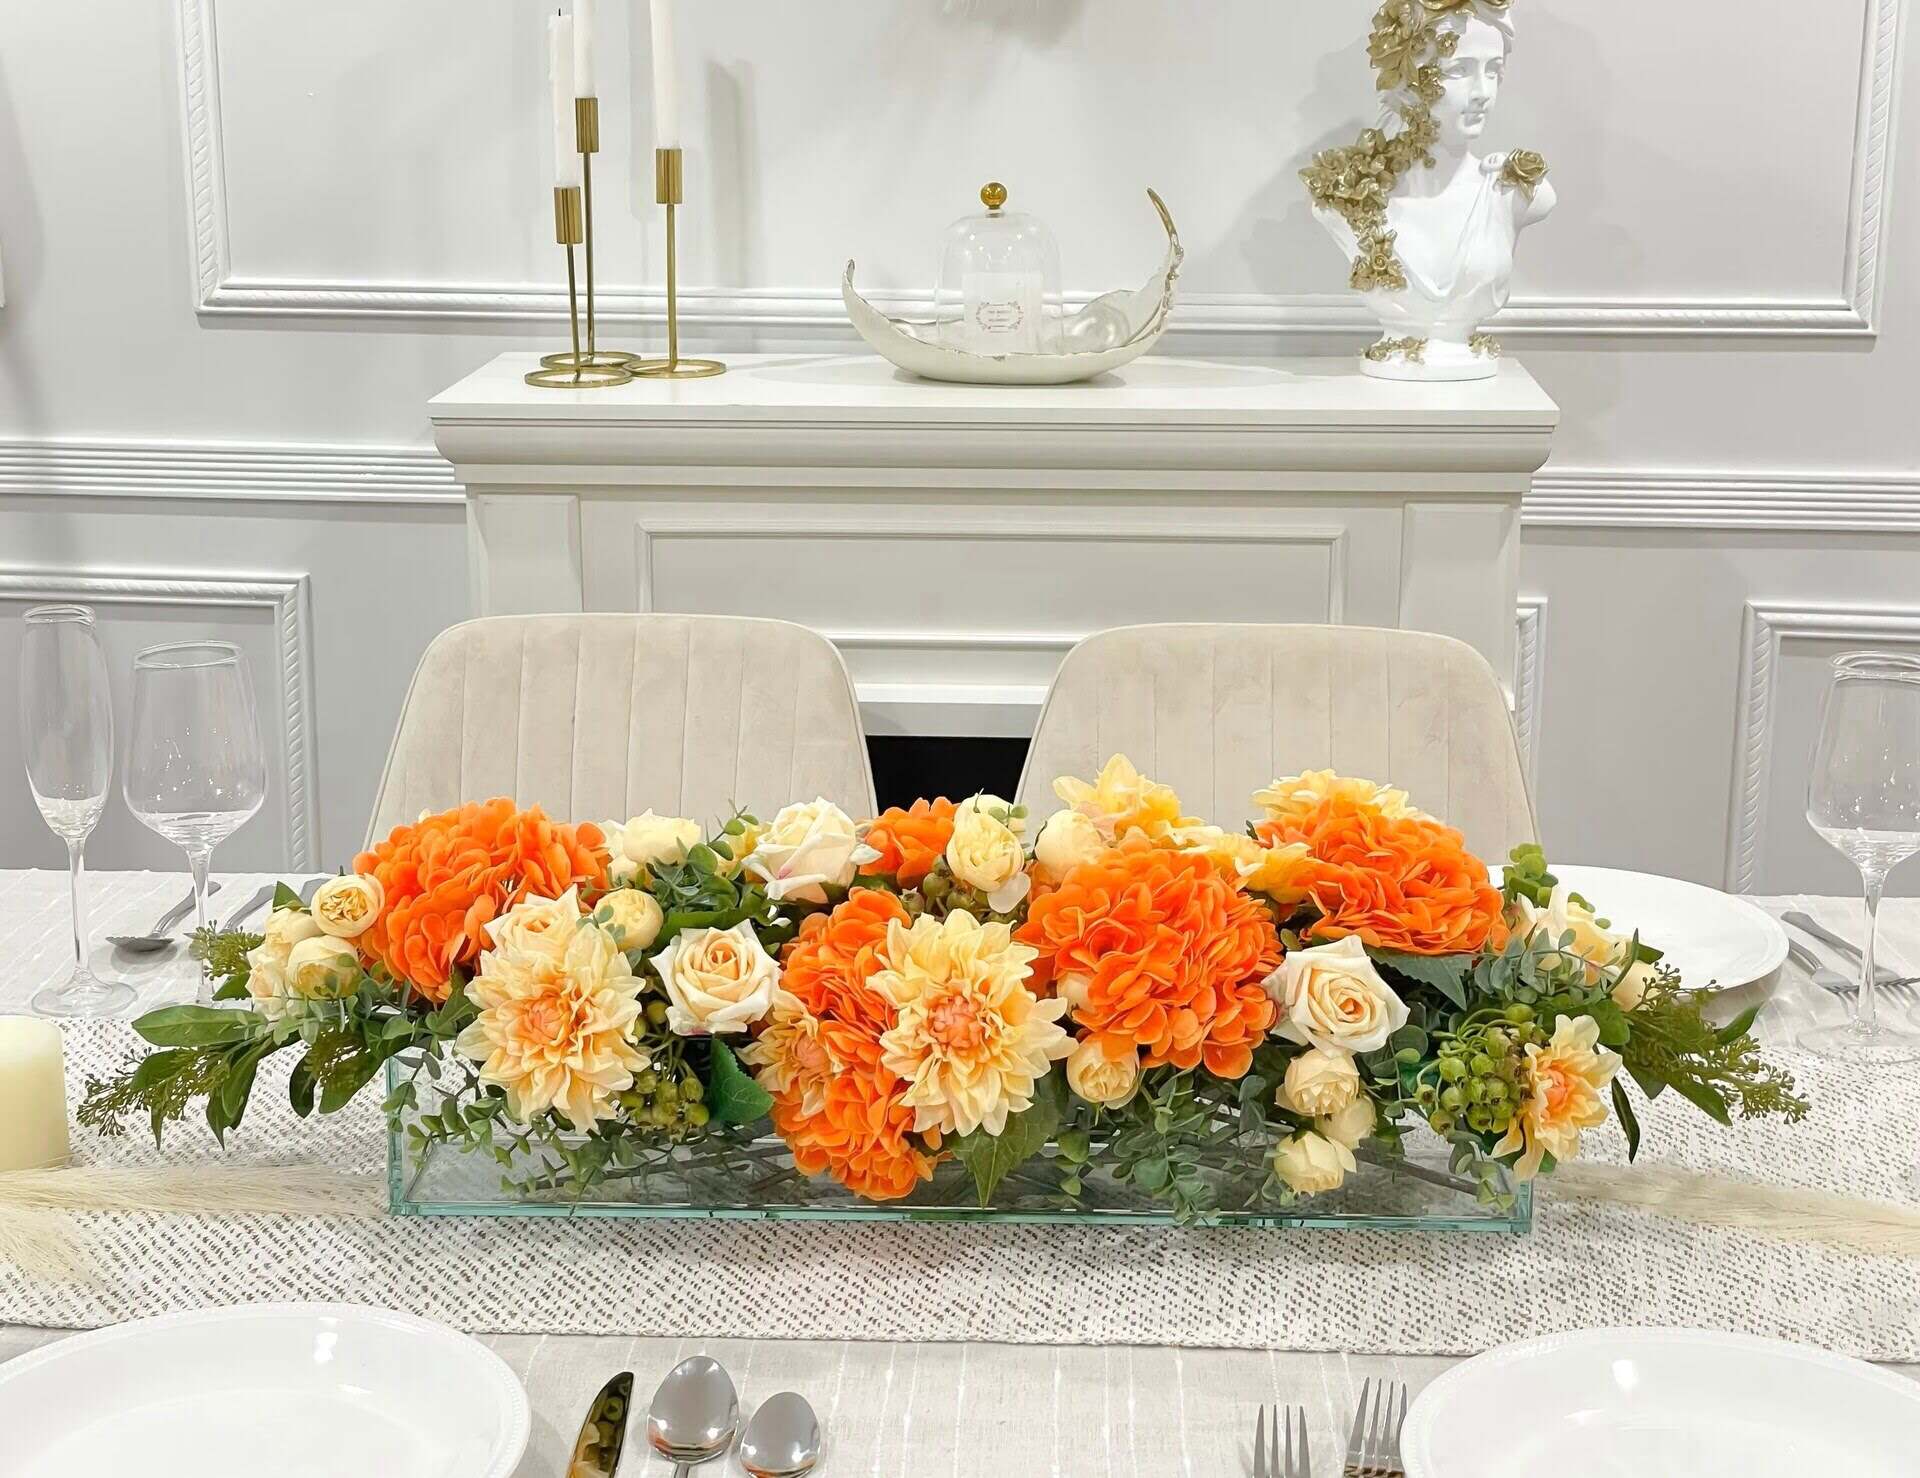 How To Make A Full Silk Flower Table Centerpiece